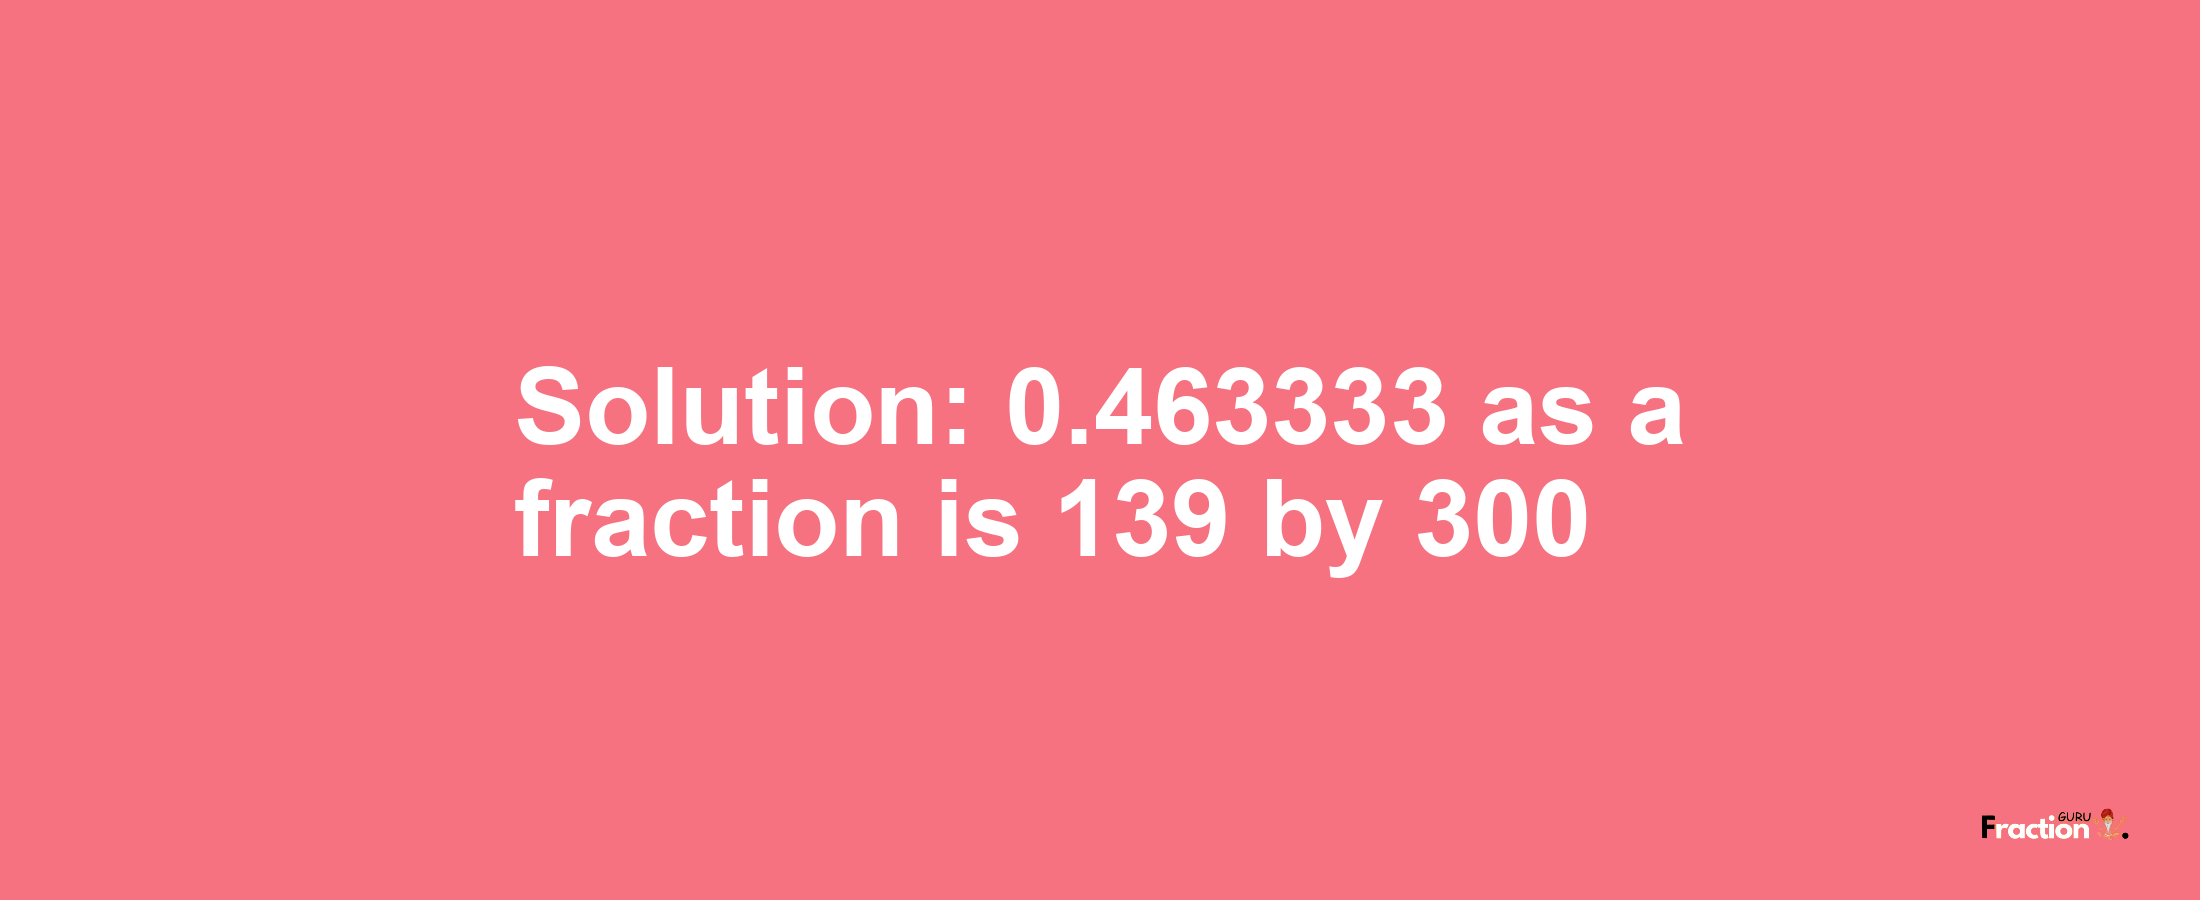 Solution:0.463333 as a fraction is 139/300